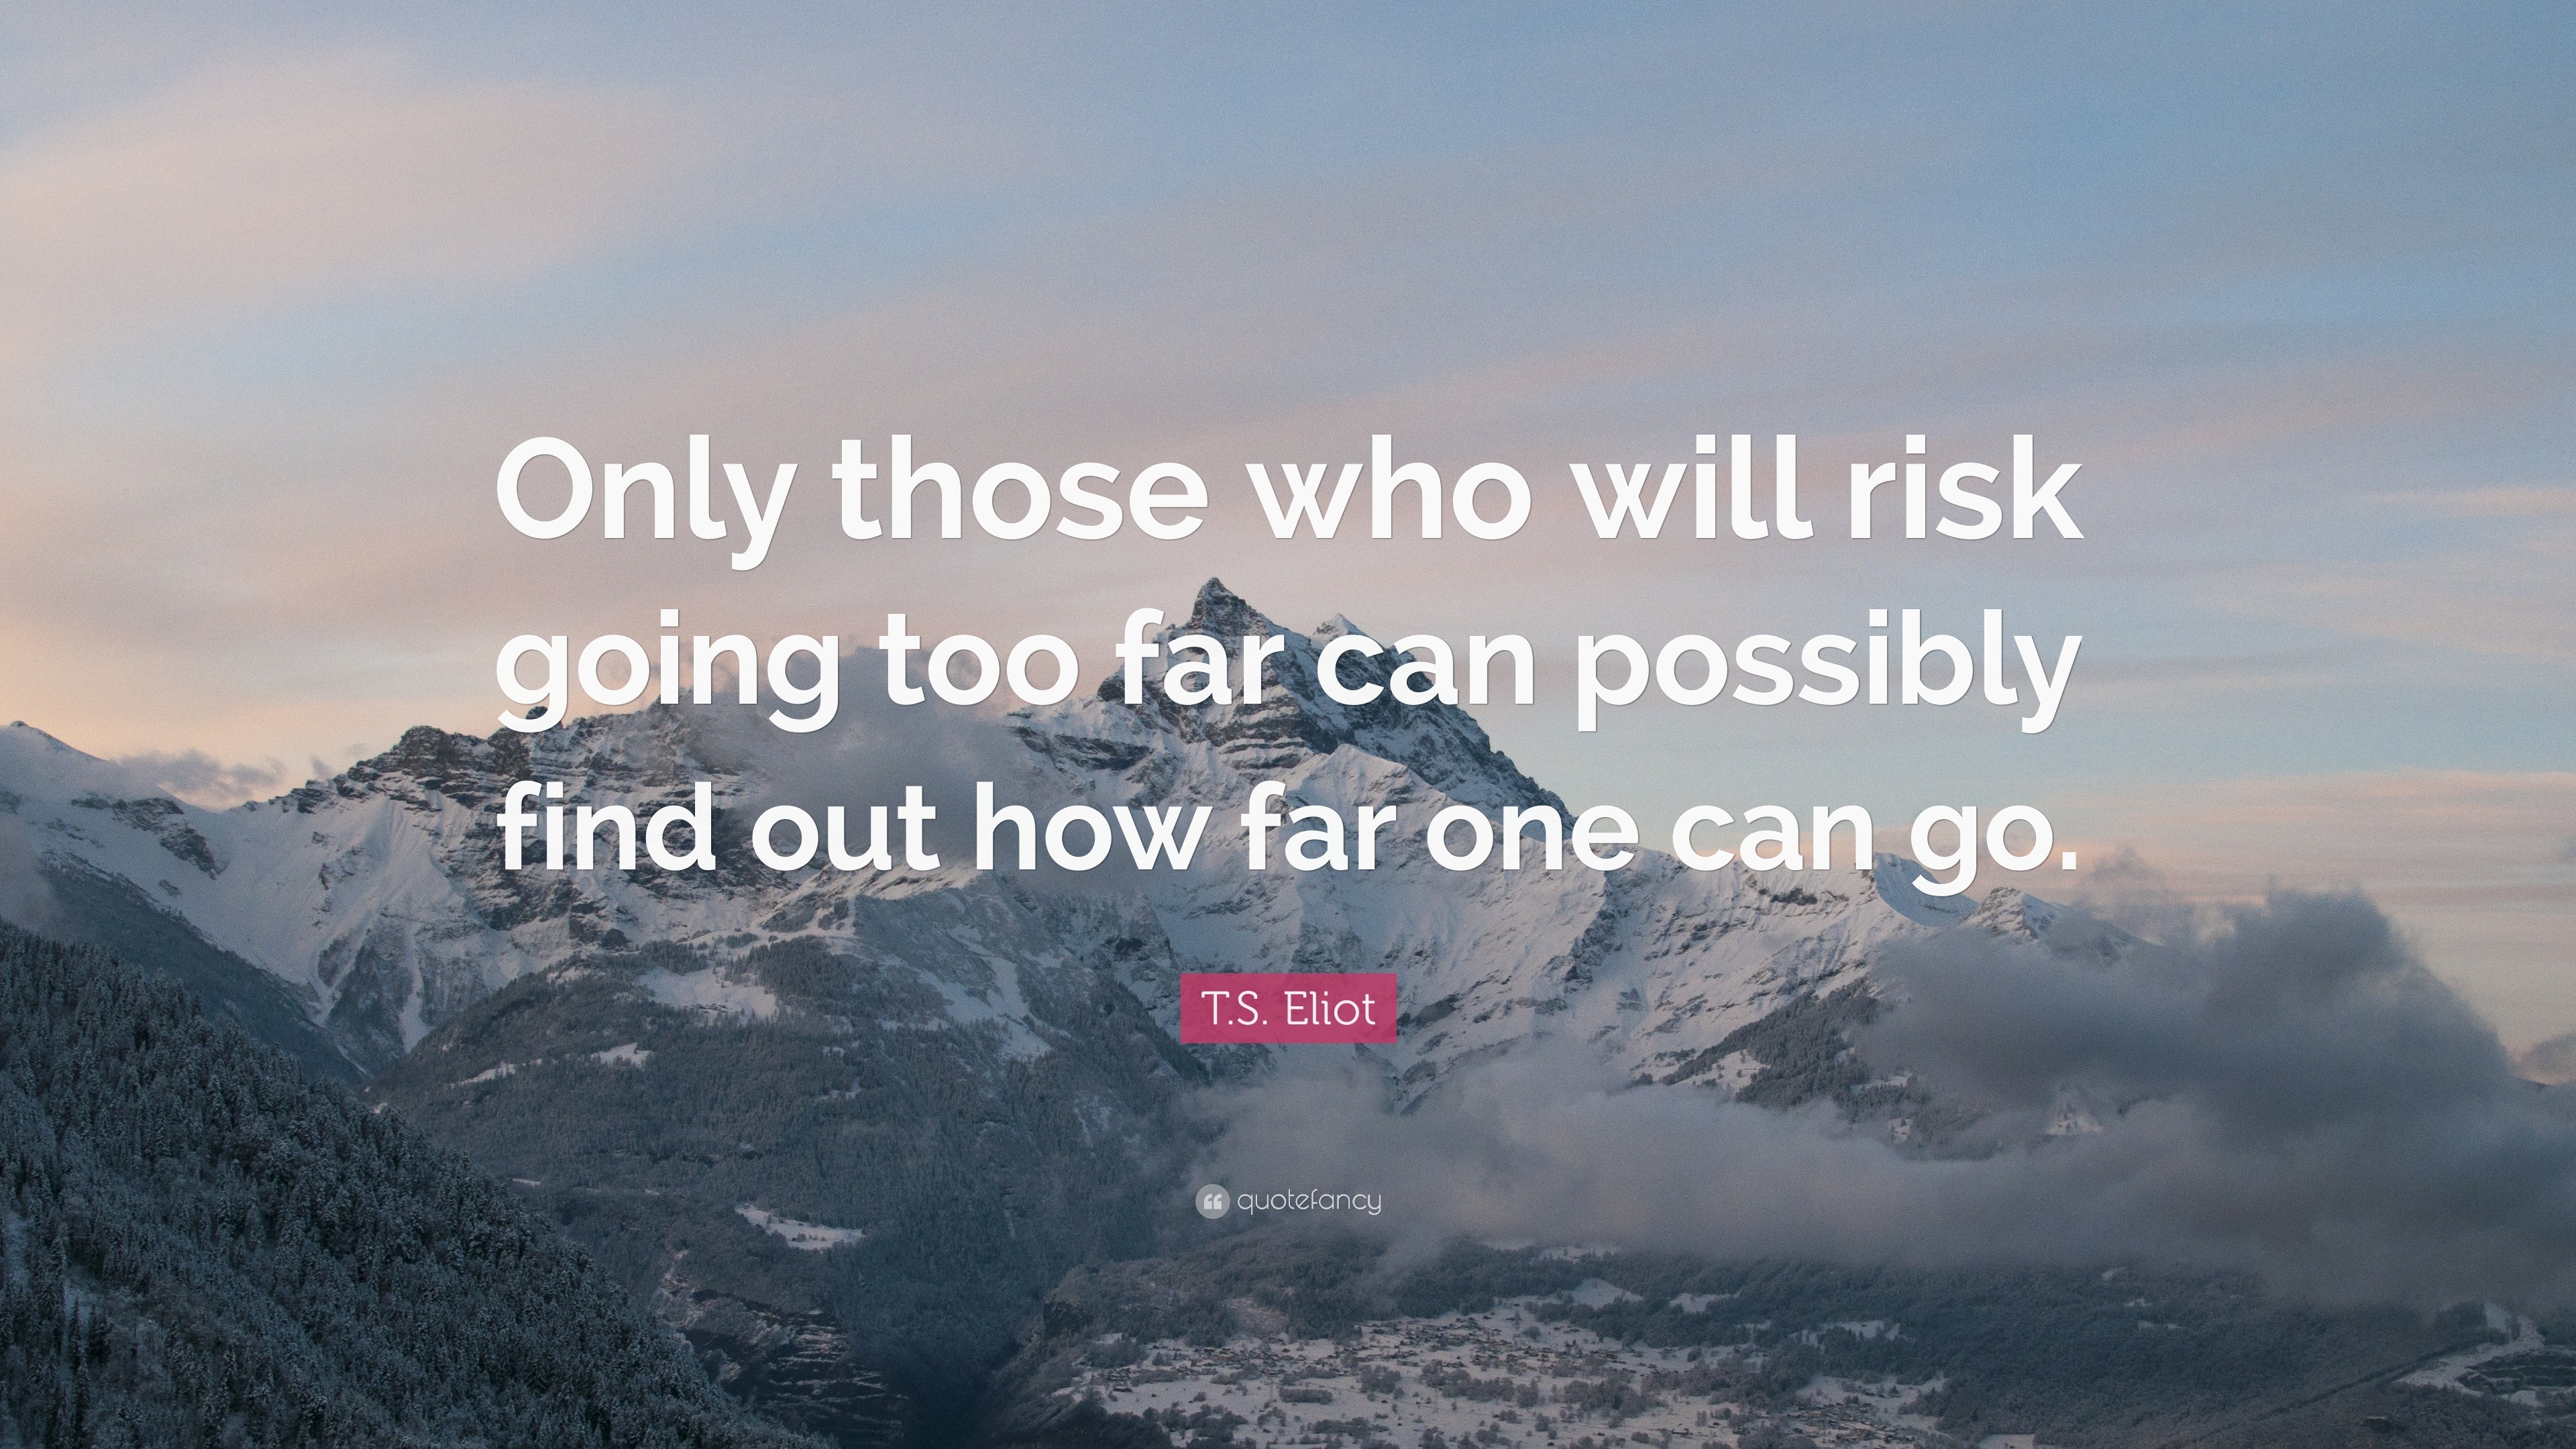 T. S. Eliot Quote: “Only those who will risk going too far can possibly